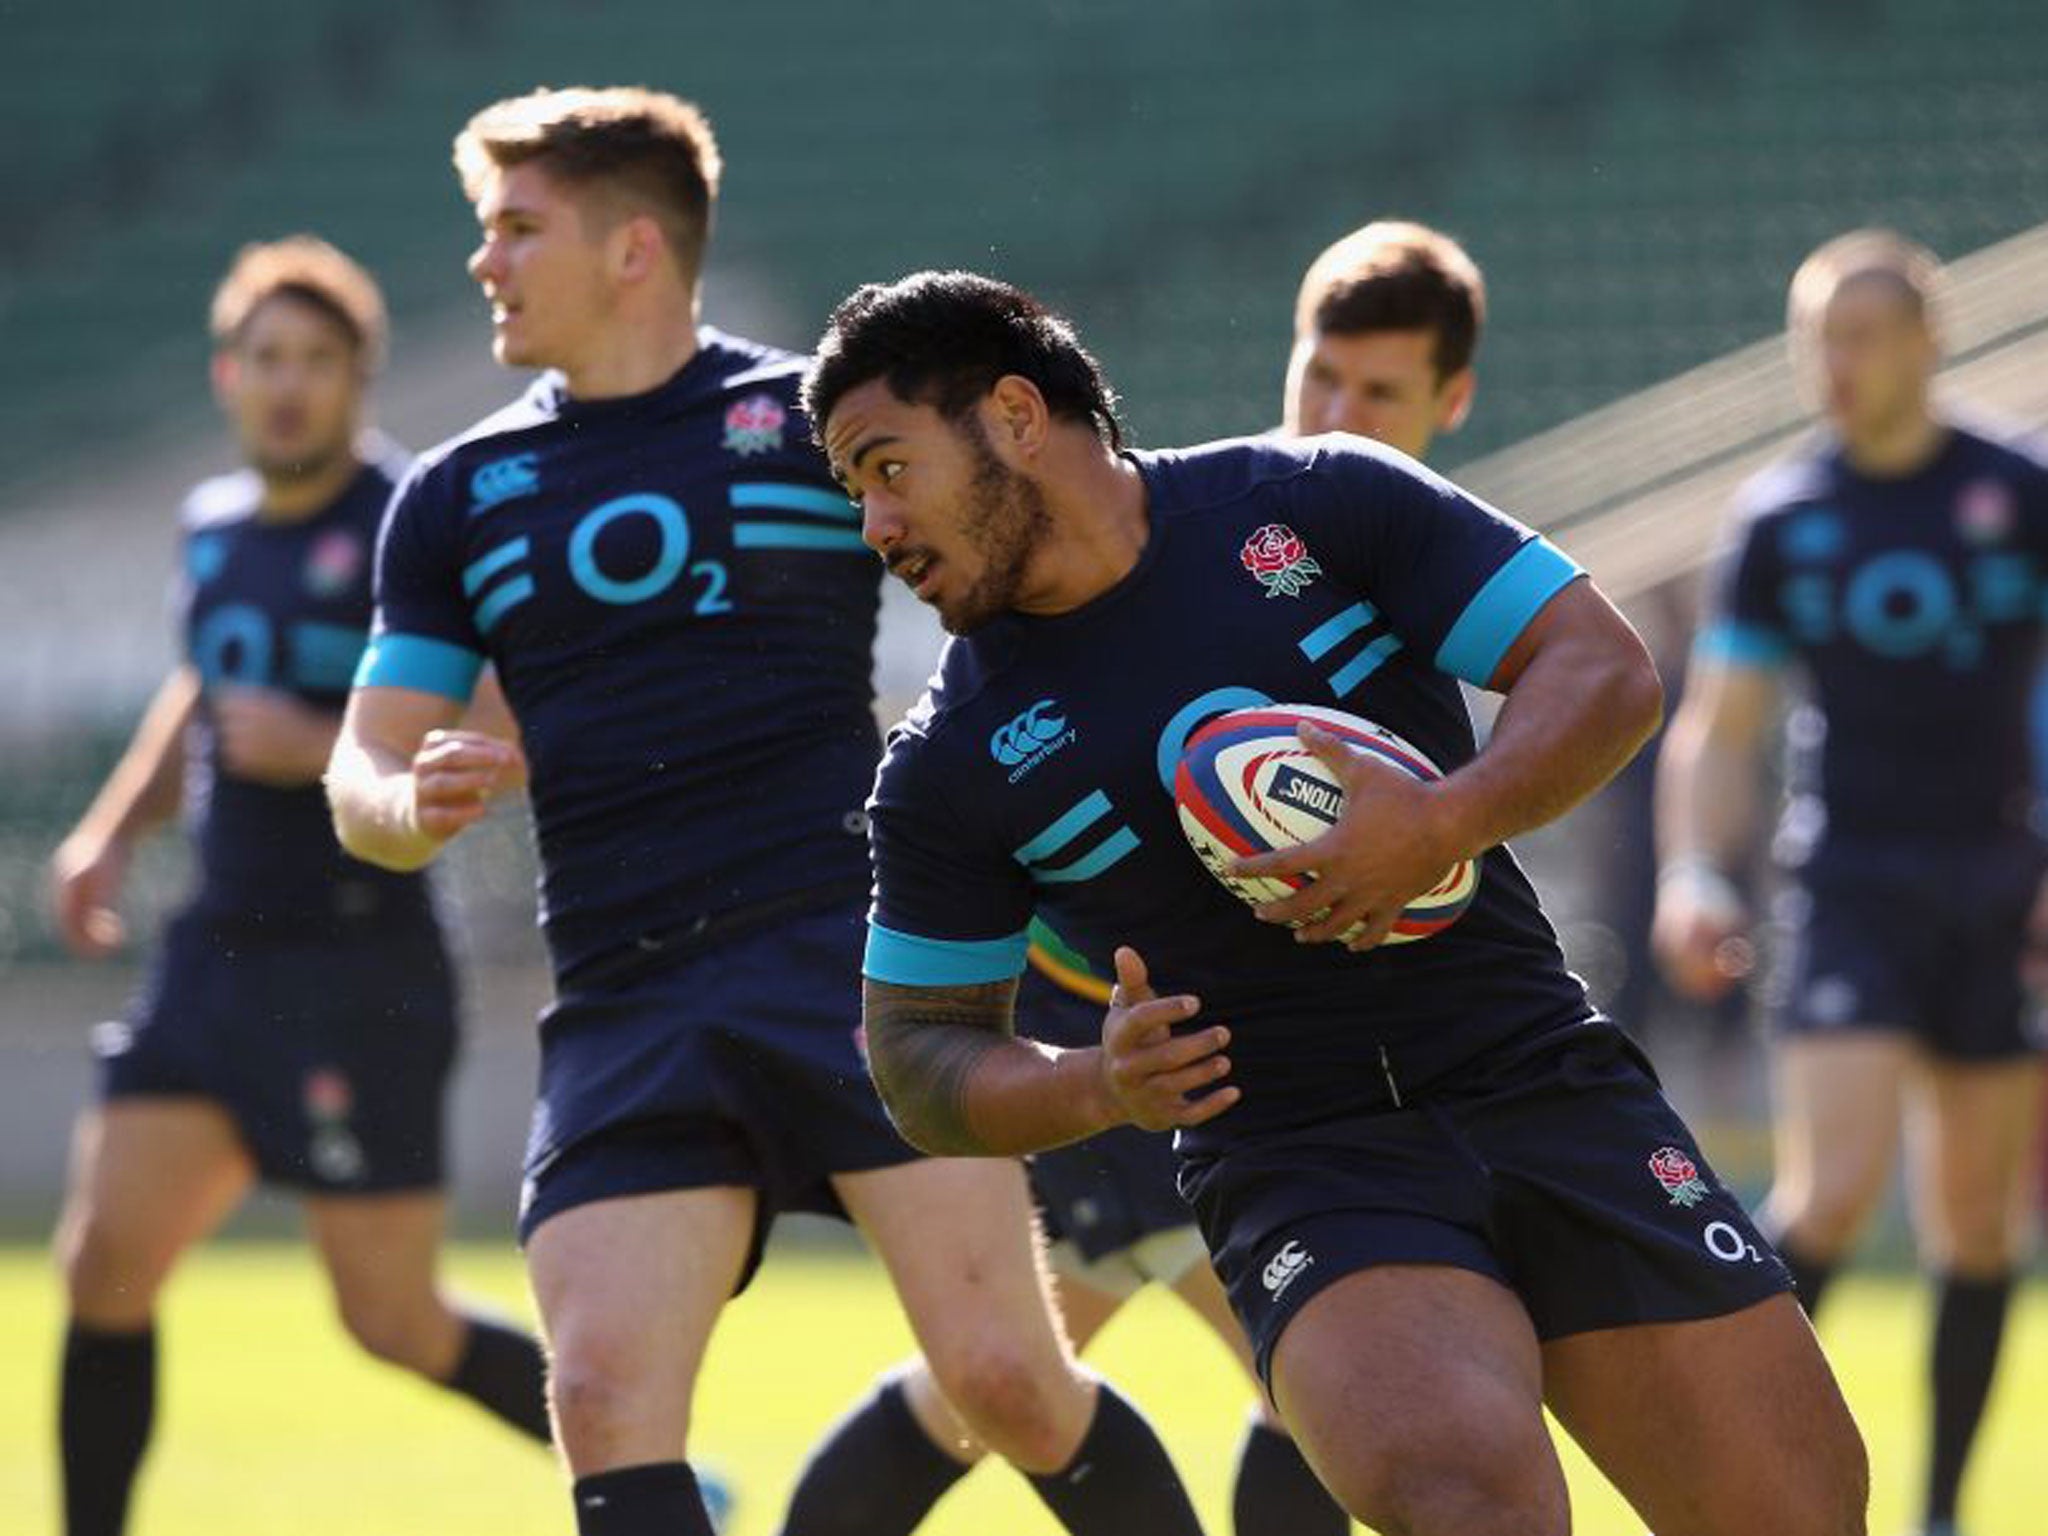 Leicester star Manu Tuilagi takes part in an England training session